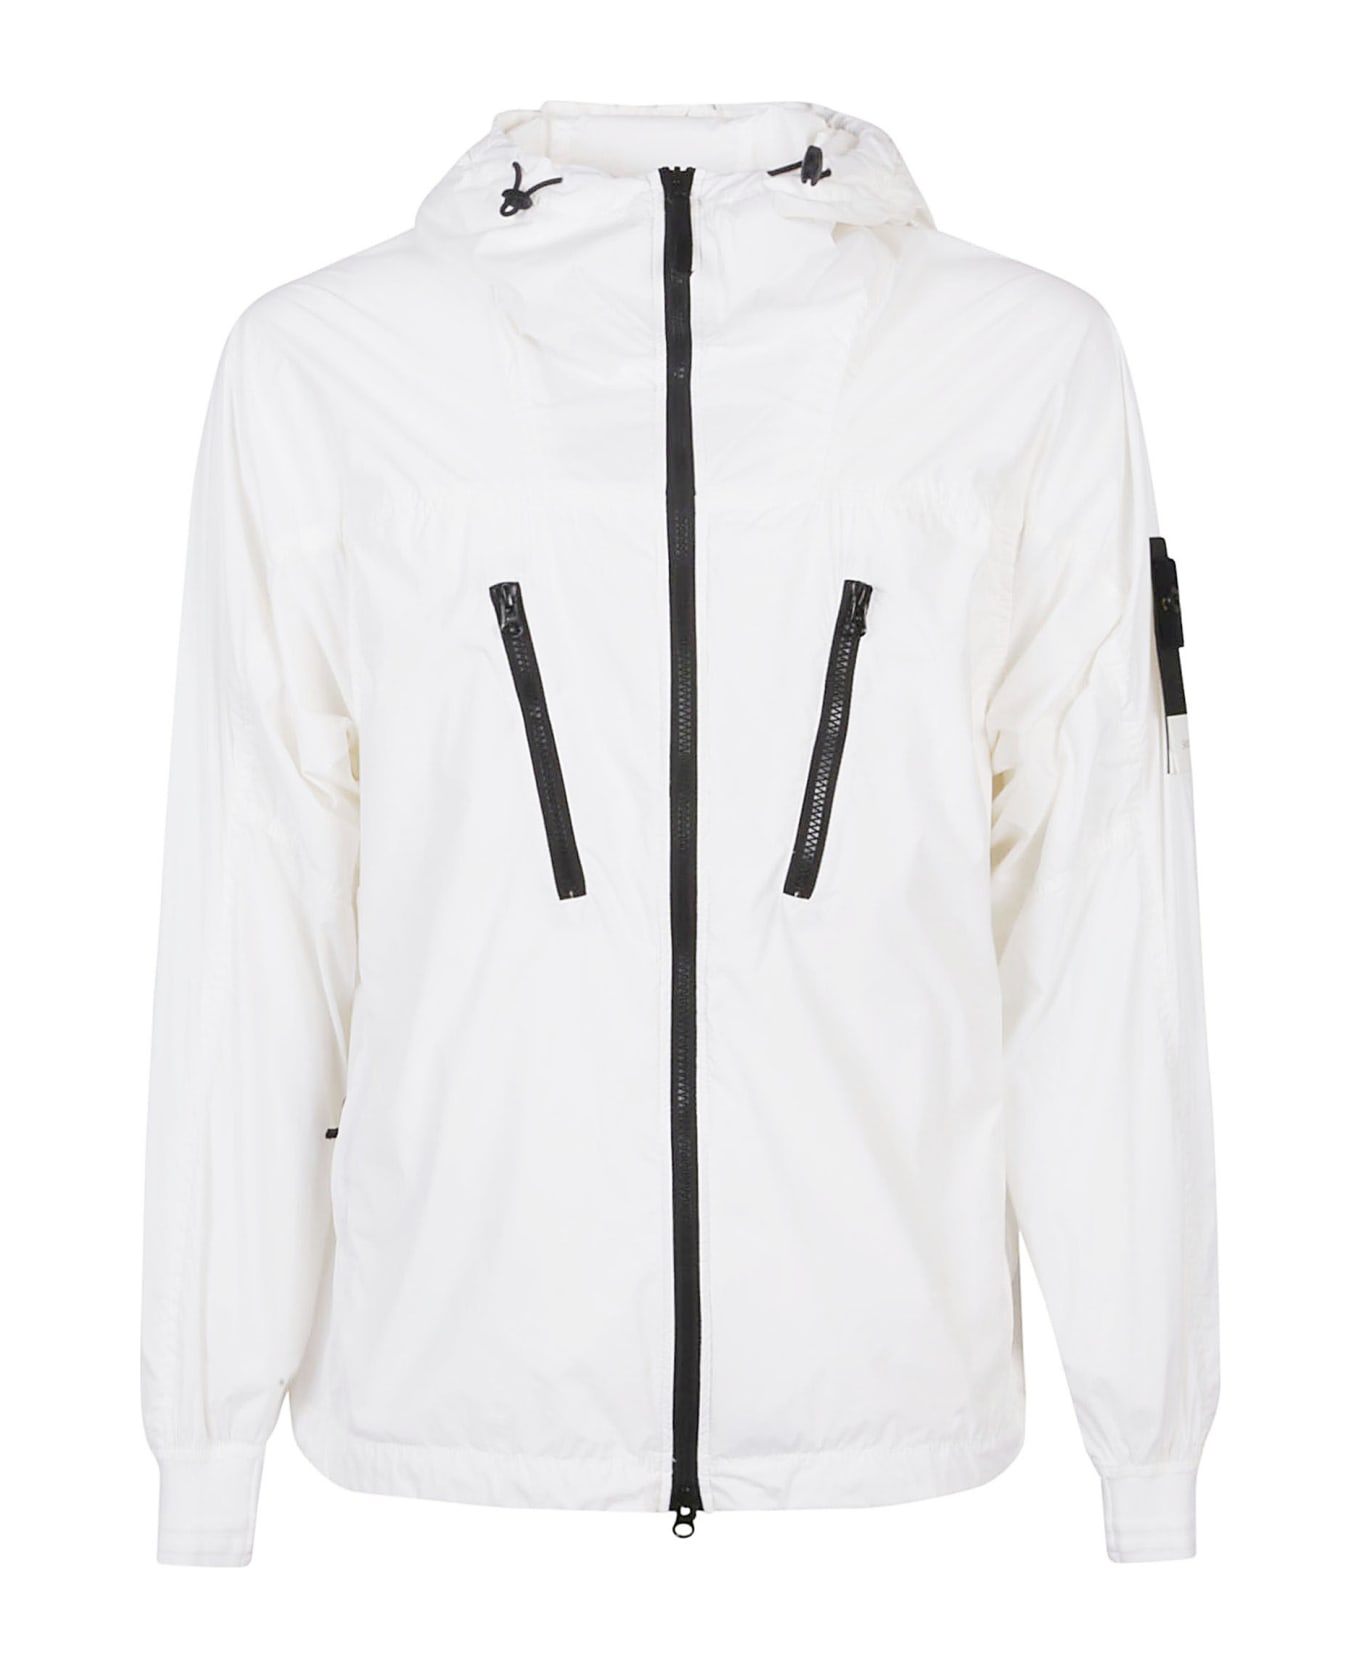 Stone Island Packable Down Jacket - White ジャケット